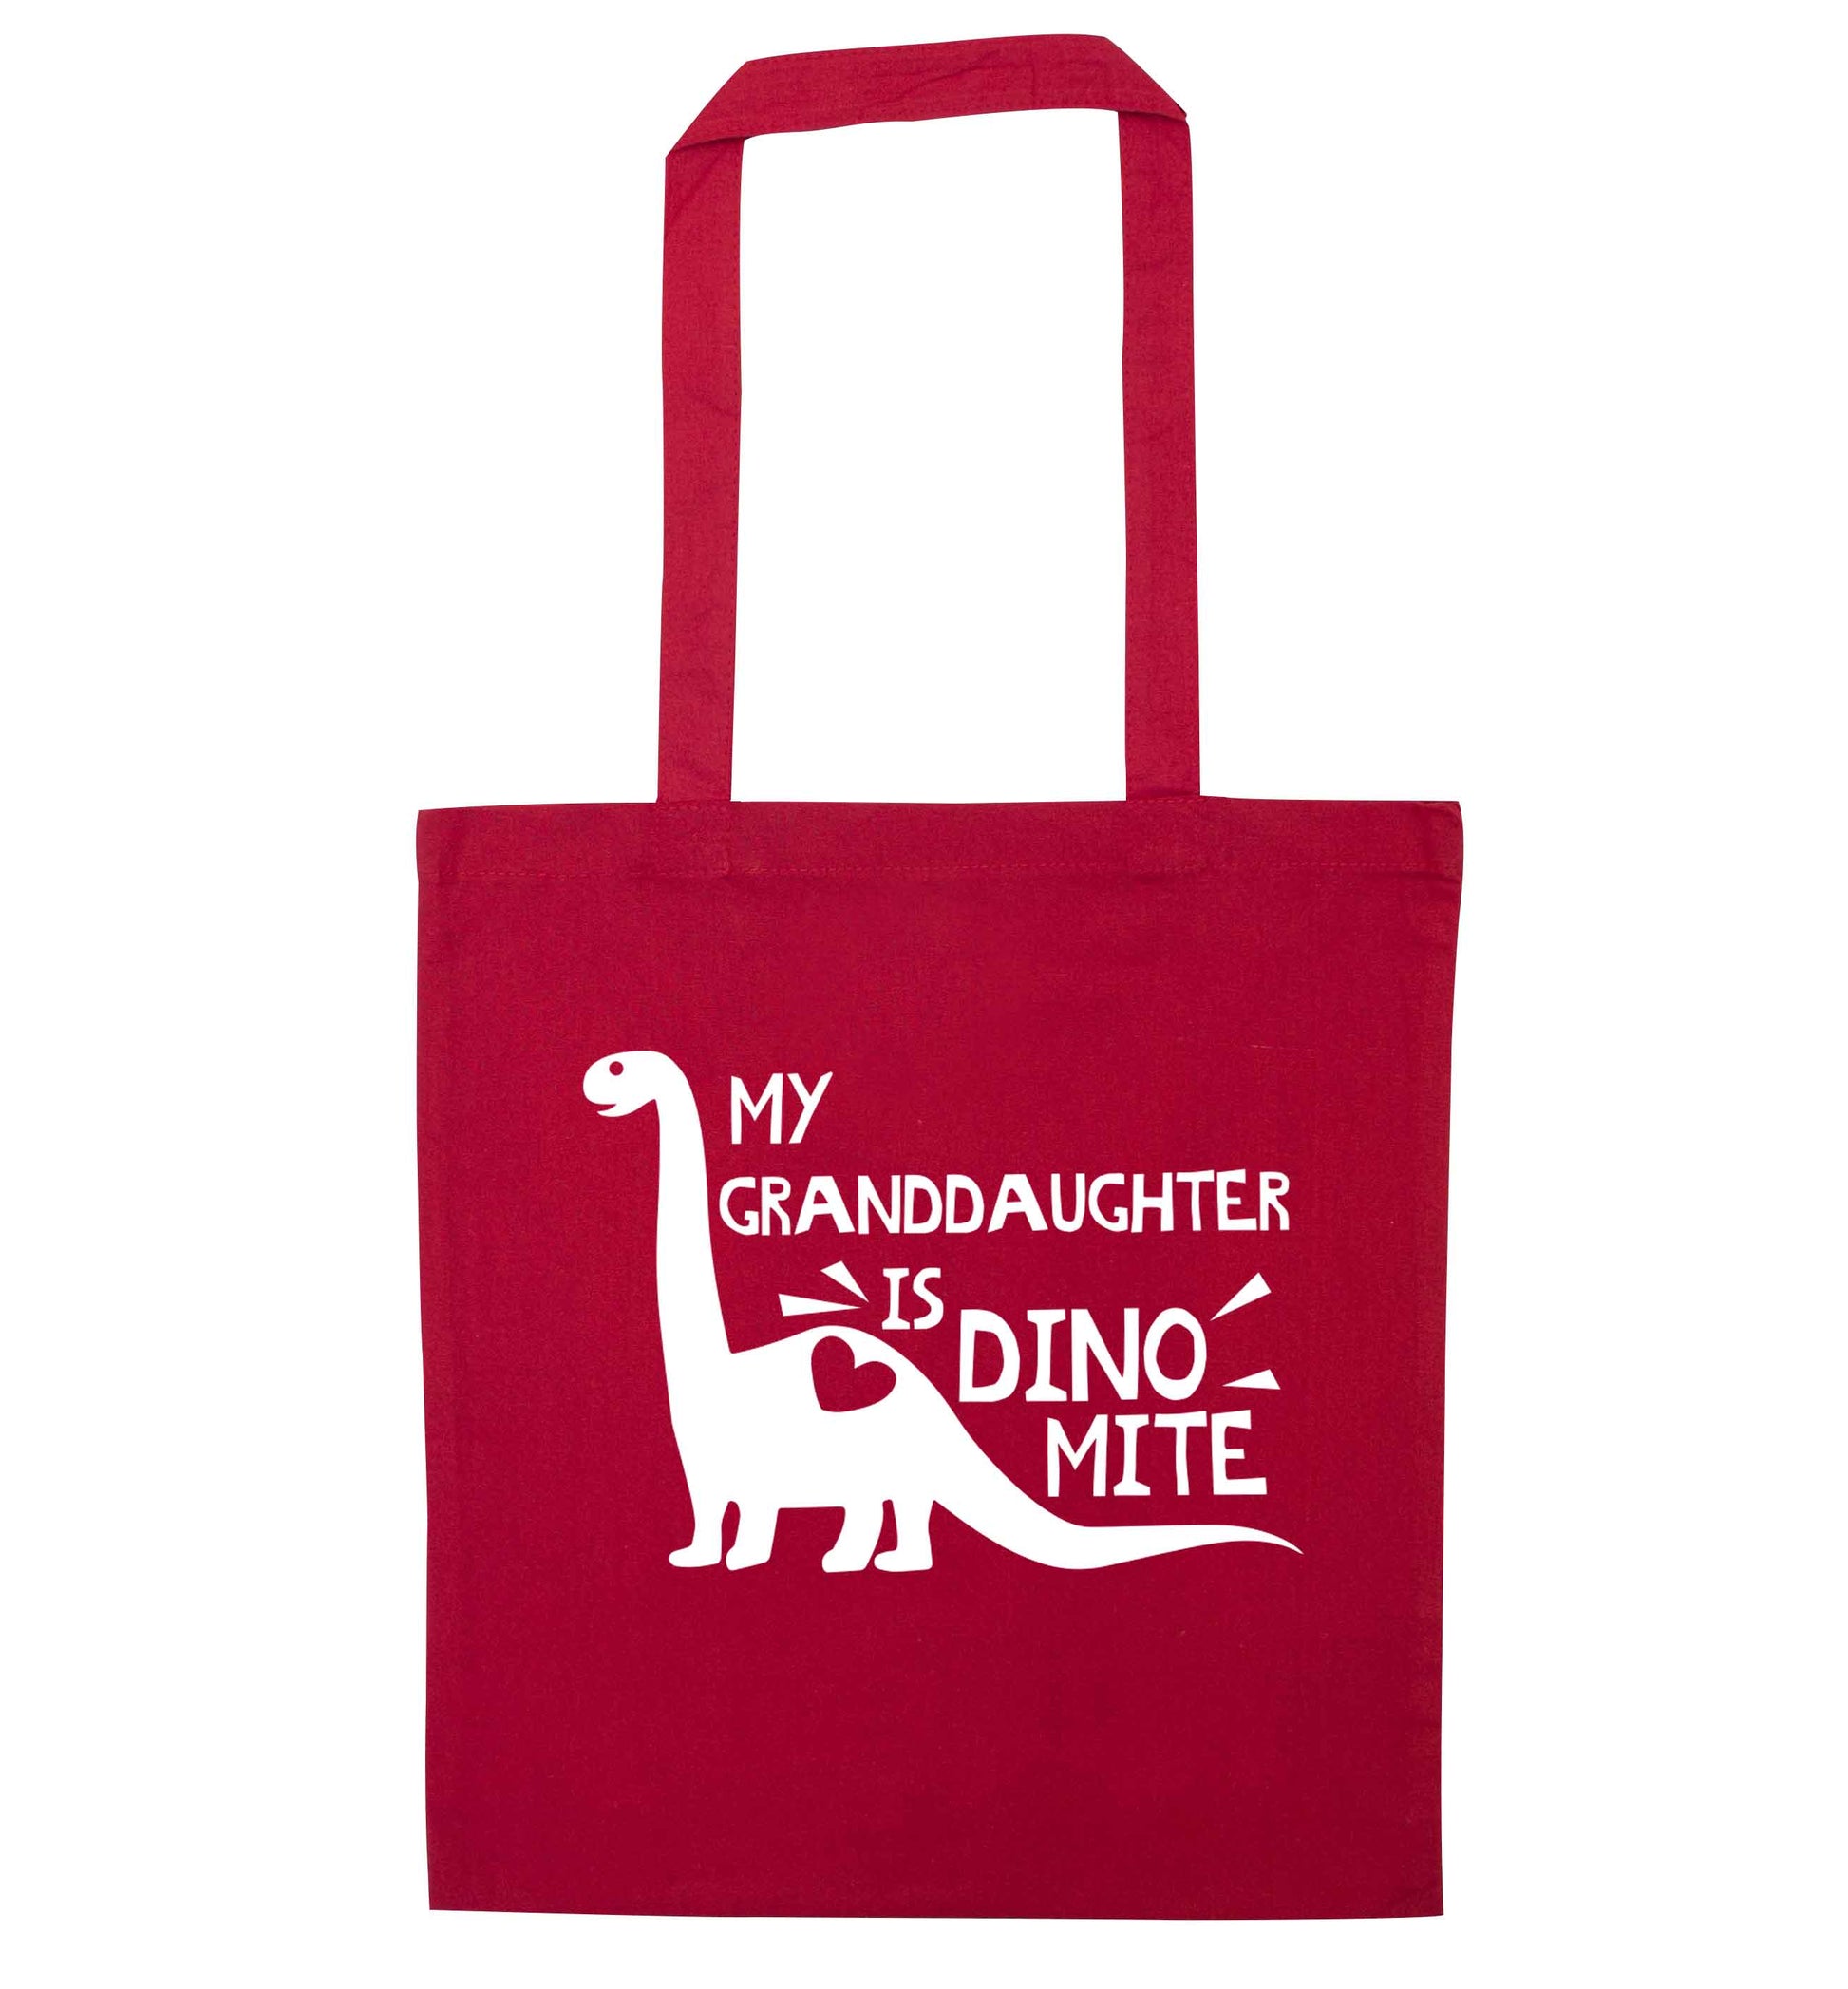 My granddaughter is dinomite! red tote bag